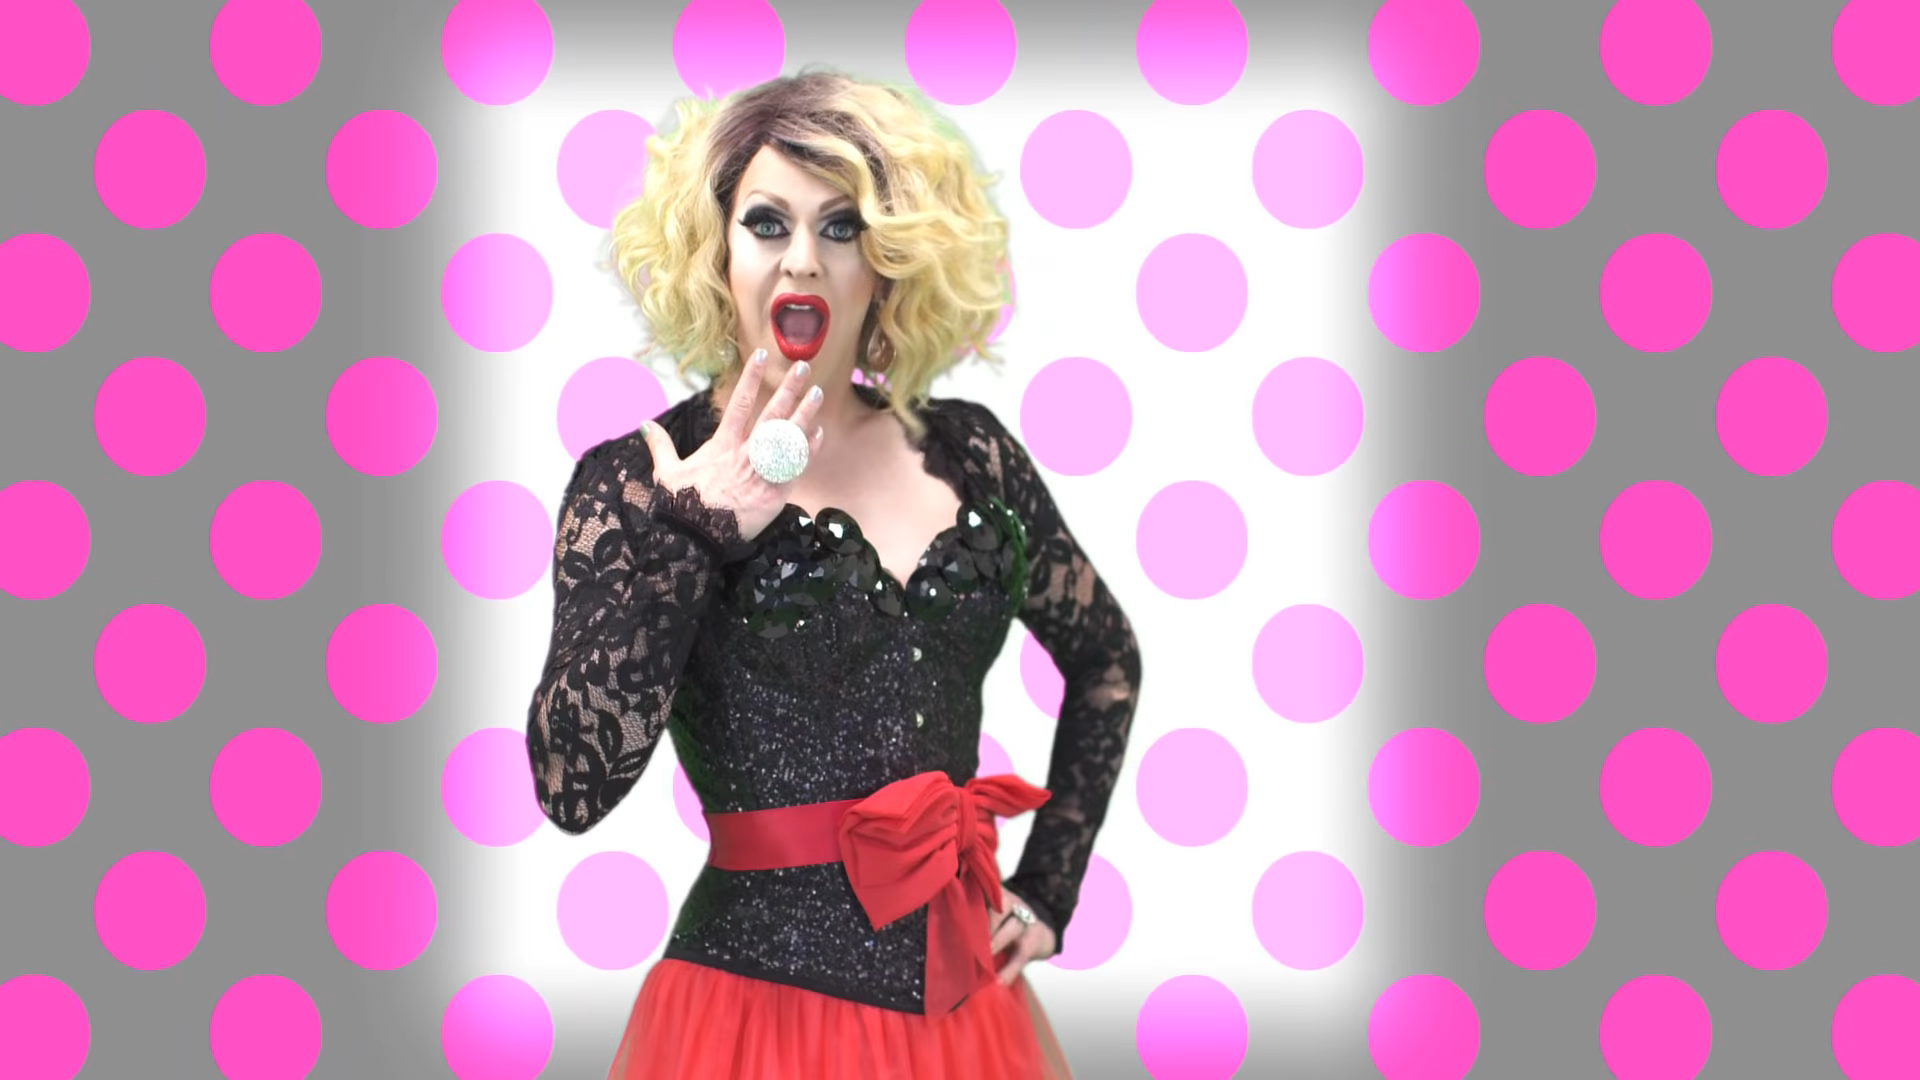 I Fcked Your Dad by Kevin Yee feat. Pandora Boxx